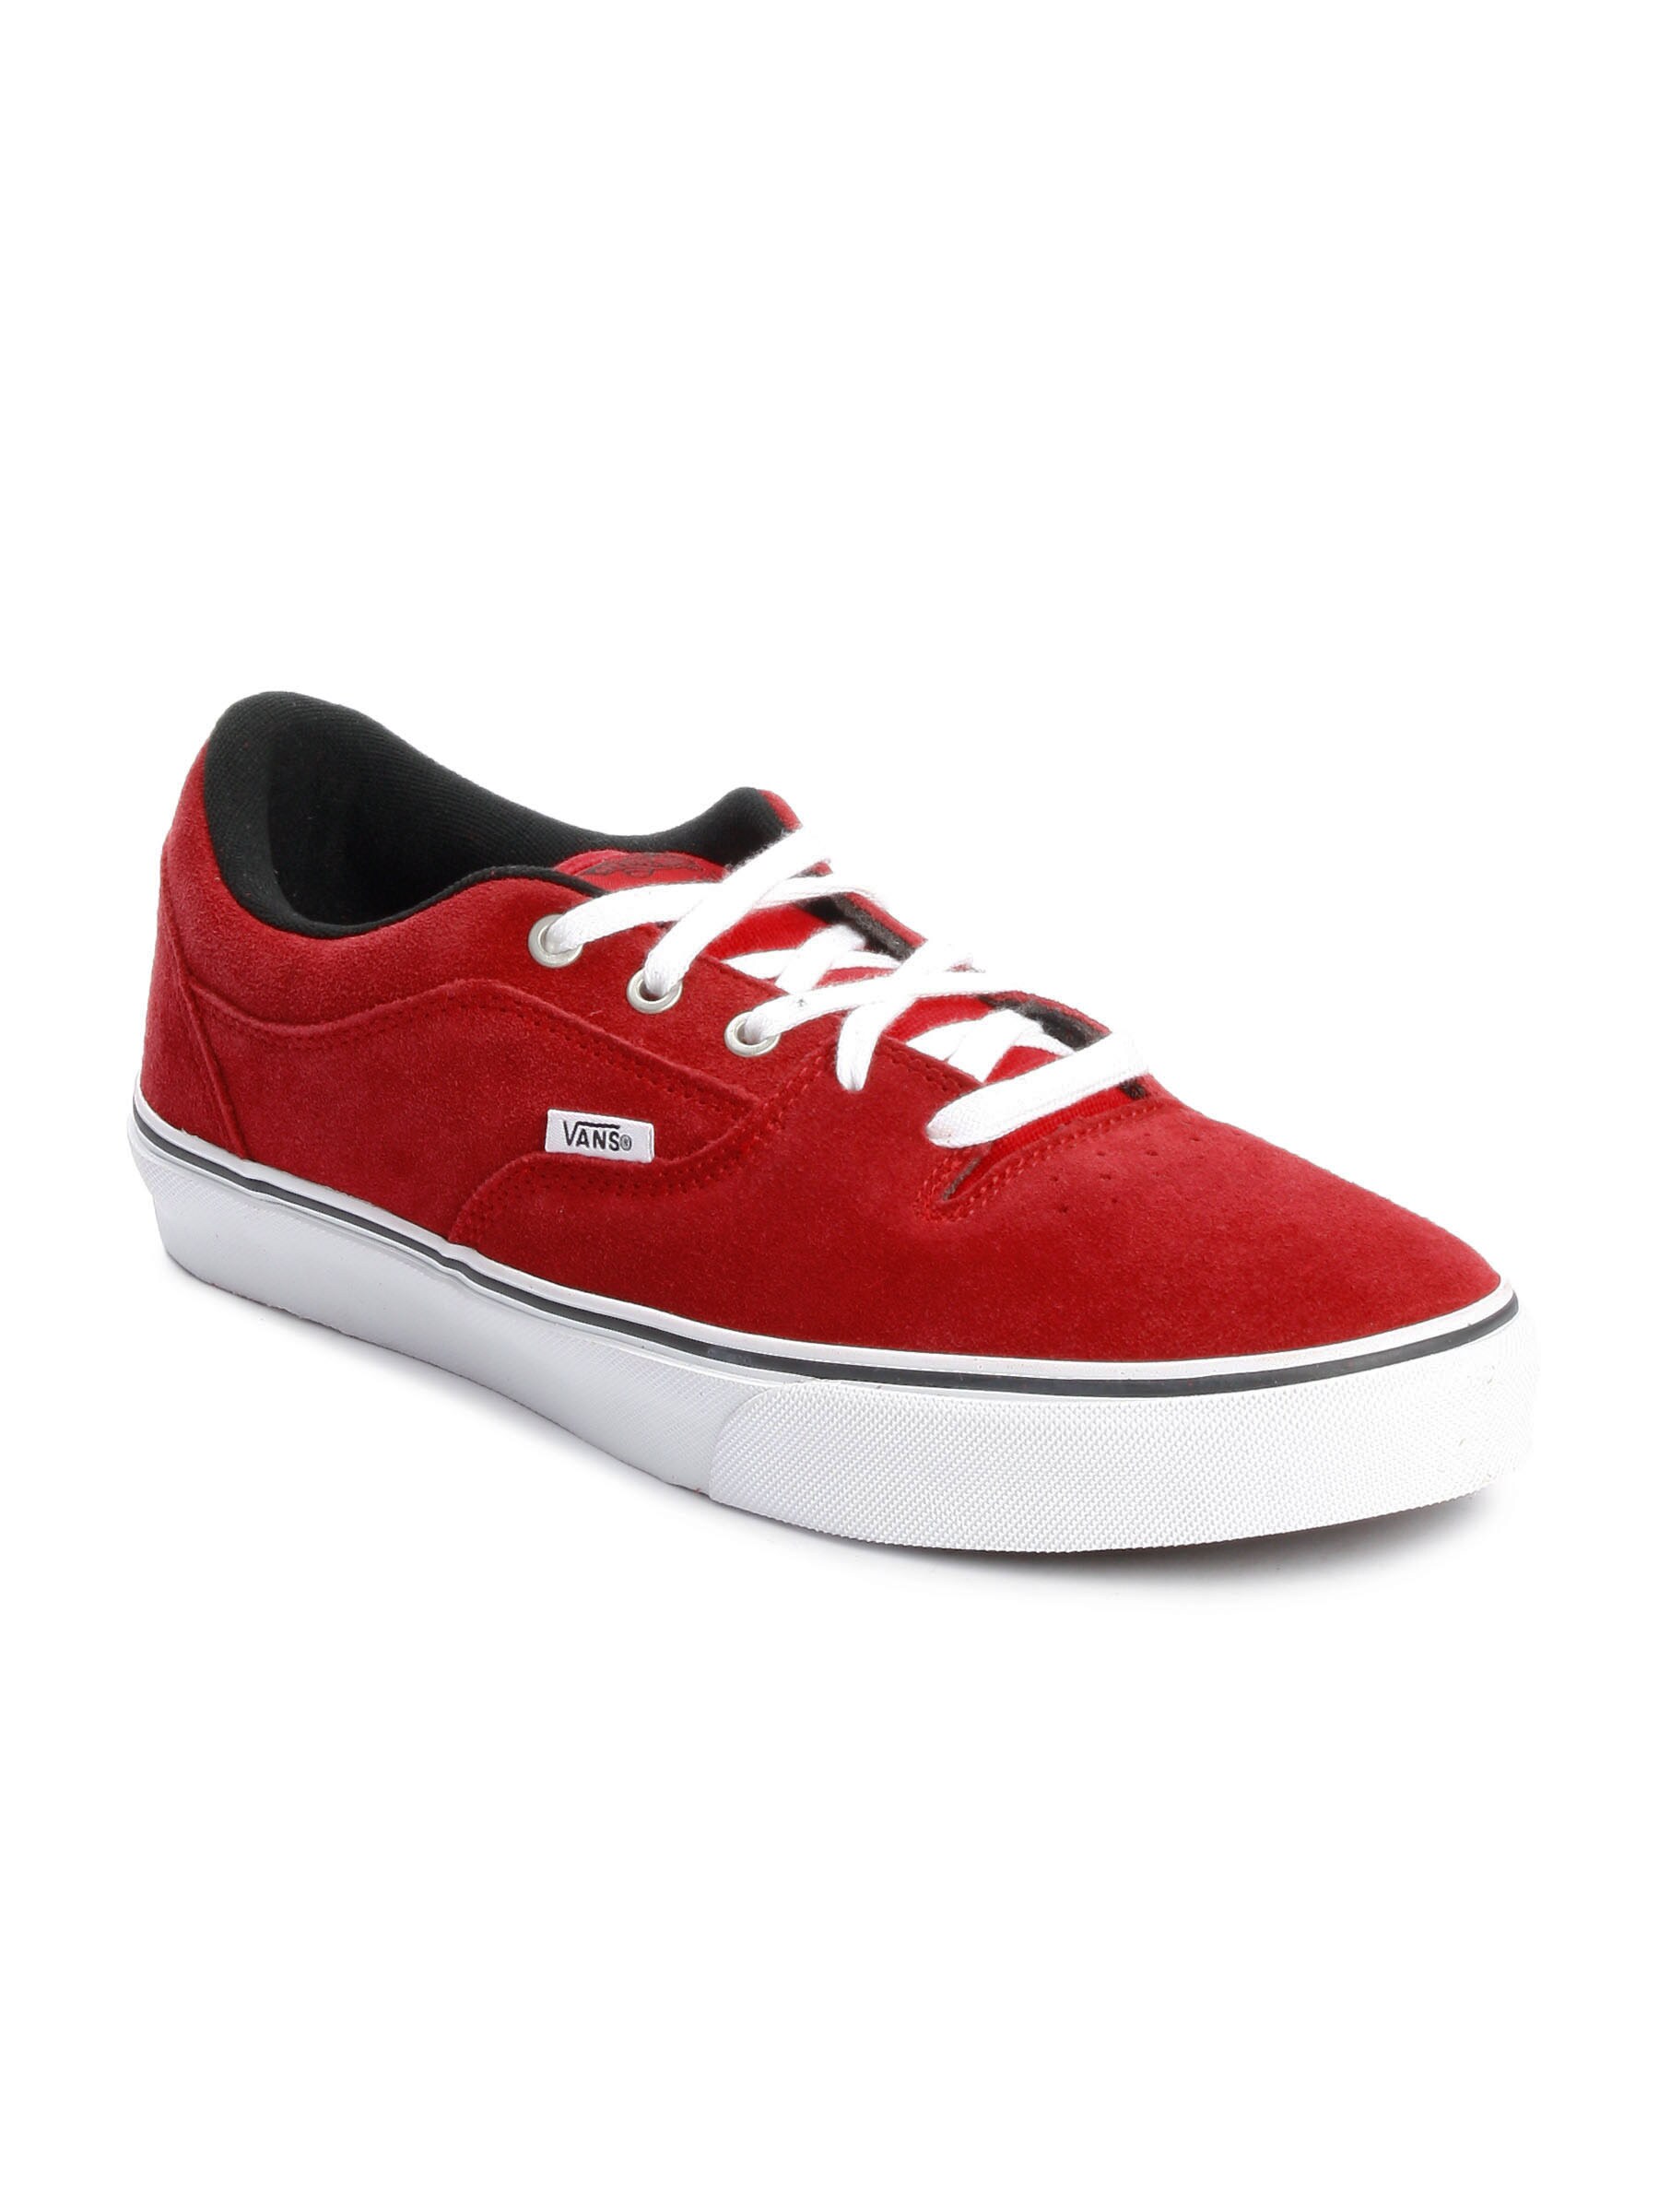 Vans Men Rowley Style 99 S Red Casual Shoes